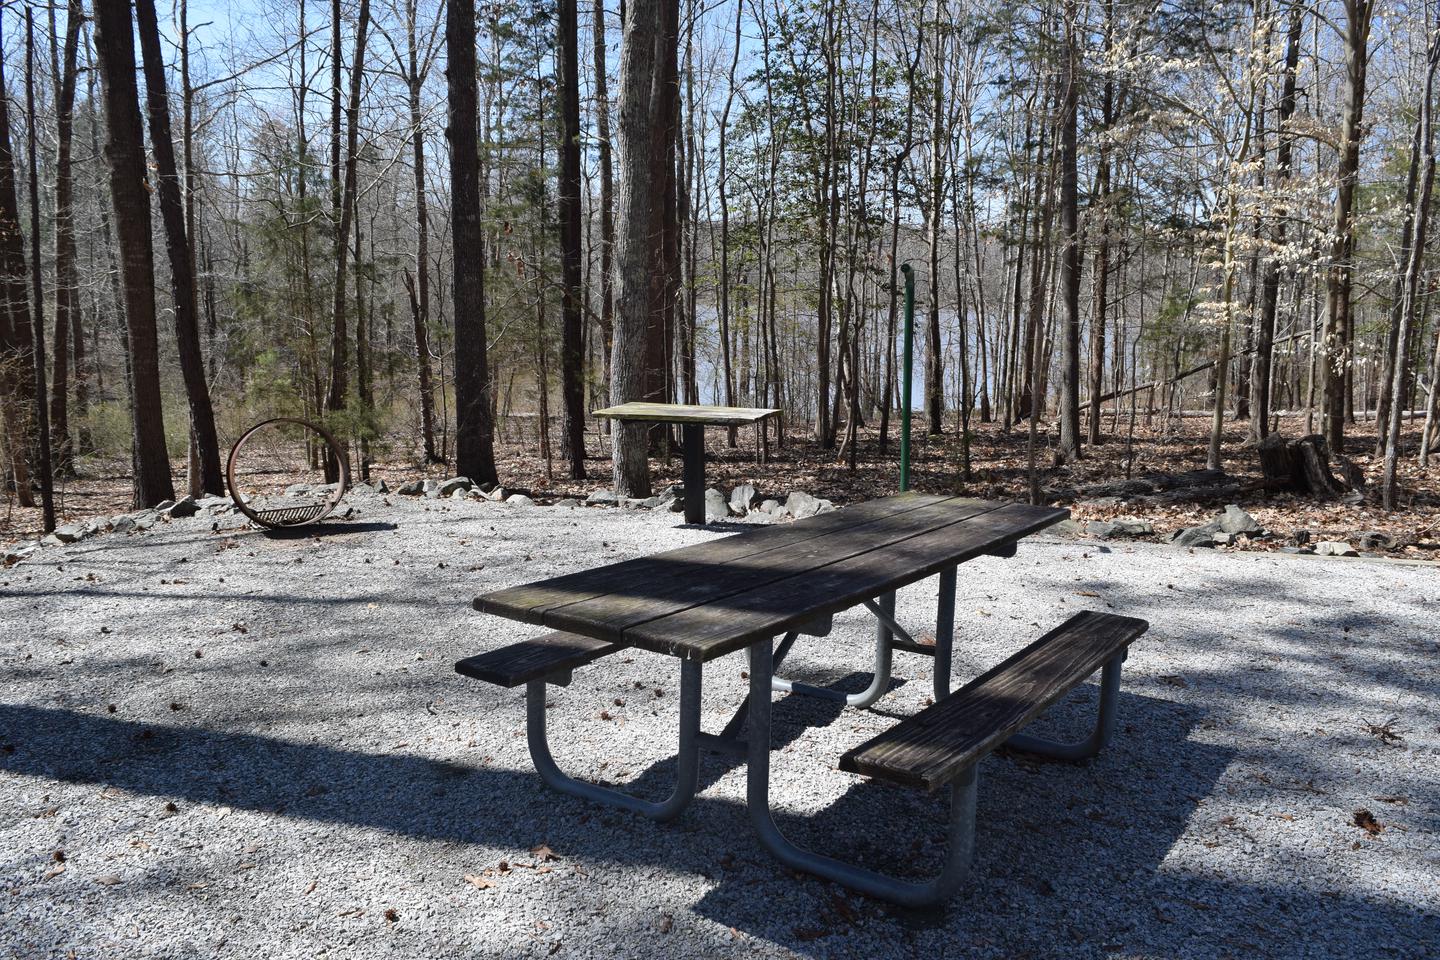 Longwood Campsite #47 This is a photo of the picnic table, utility table and fire ring located on the campsite.